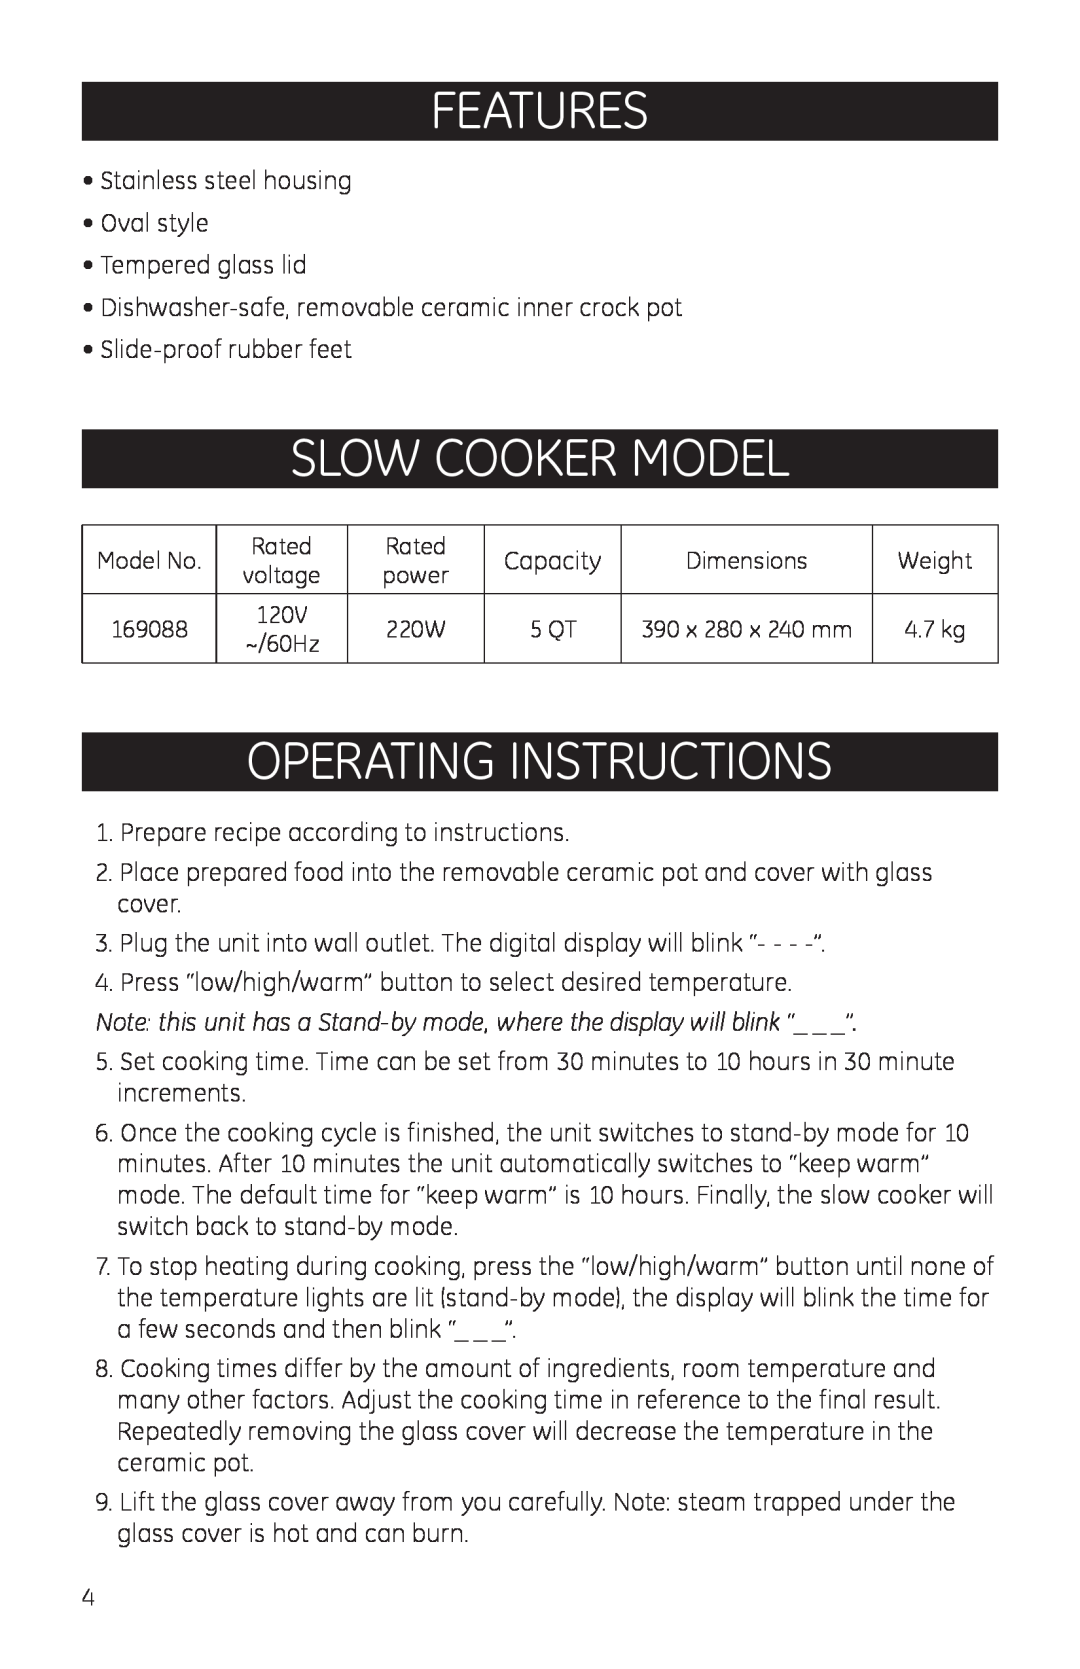 GE 681131690881 manual Features, Slow Cooker Model, Operating Instructions 